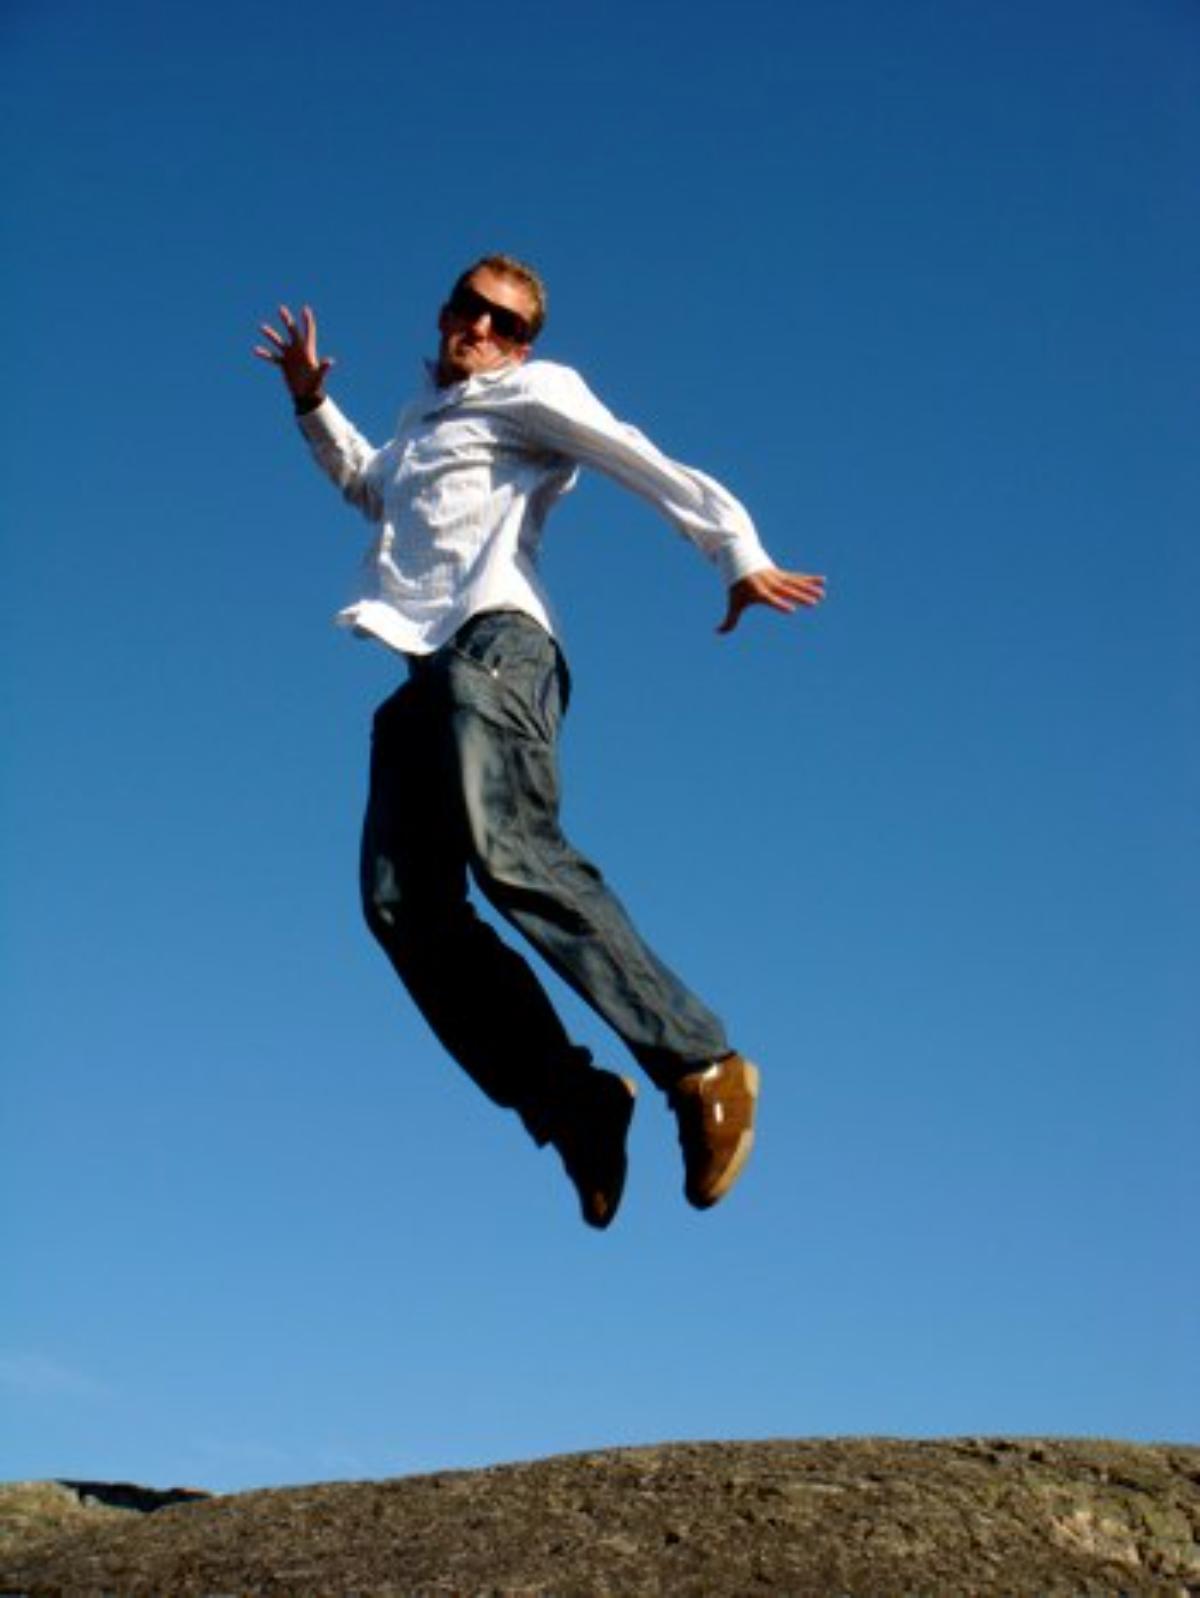 A jumping man on the photo.